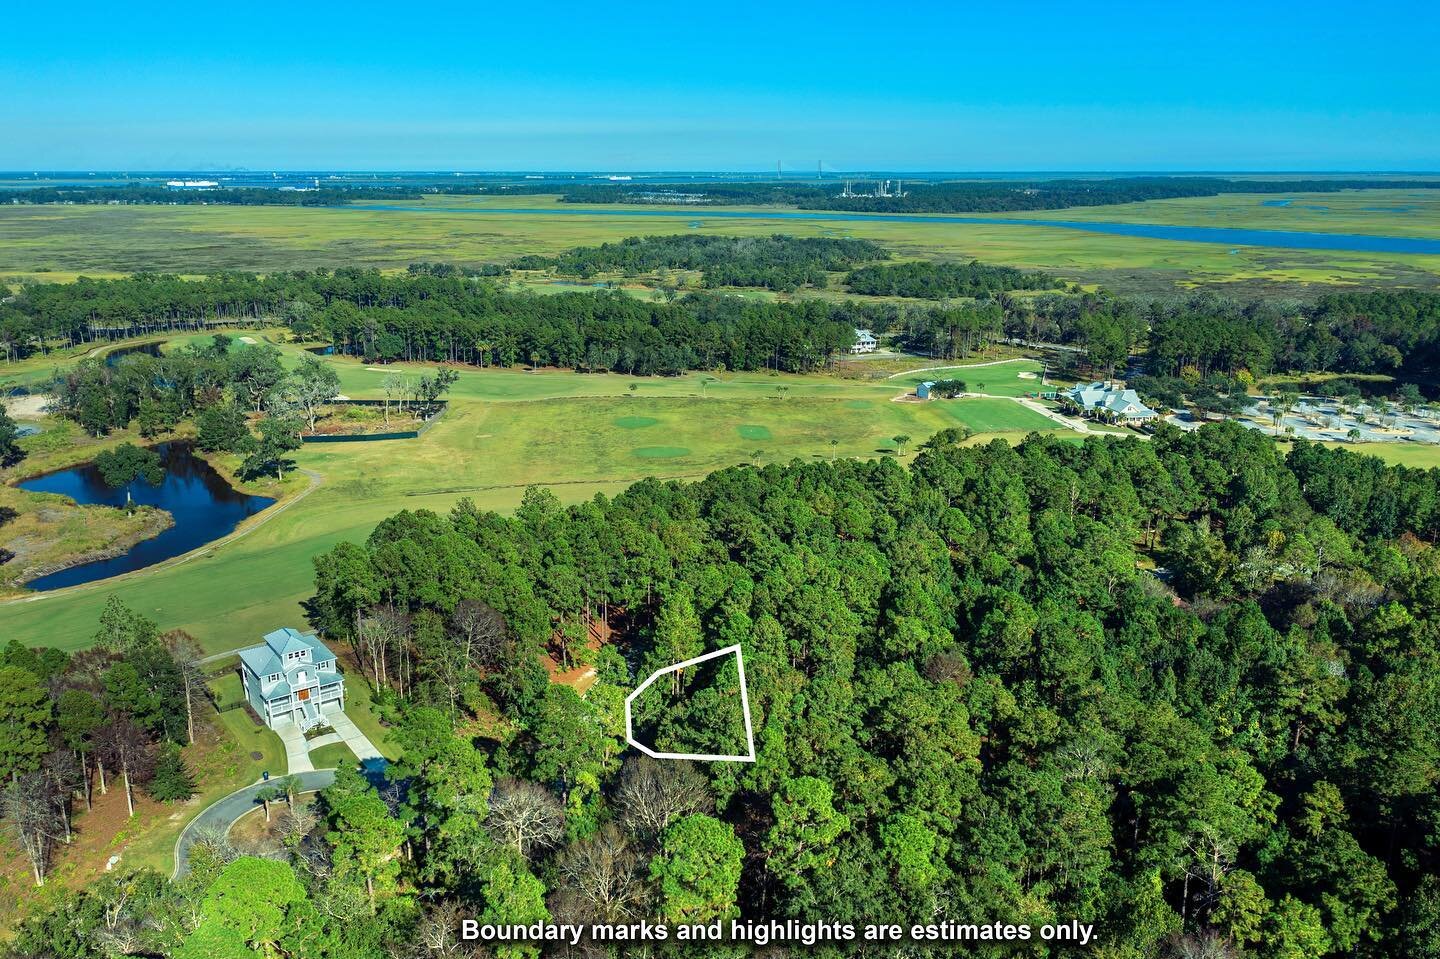 🔥 🔥 New Listing 🚨 🚨 $35K for this 0.31 acre lot on Eagle Crest in Sanctuary Cove 

1. NOT in a Flood Zone

2. Walkable to the Clubhouse Bar and Grill

3. Larger than the traditional lot in Sanctuary Cove 

www.golfclubrealtyco.com